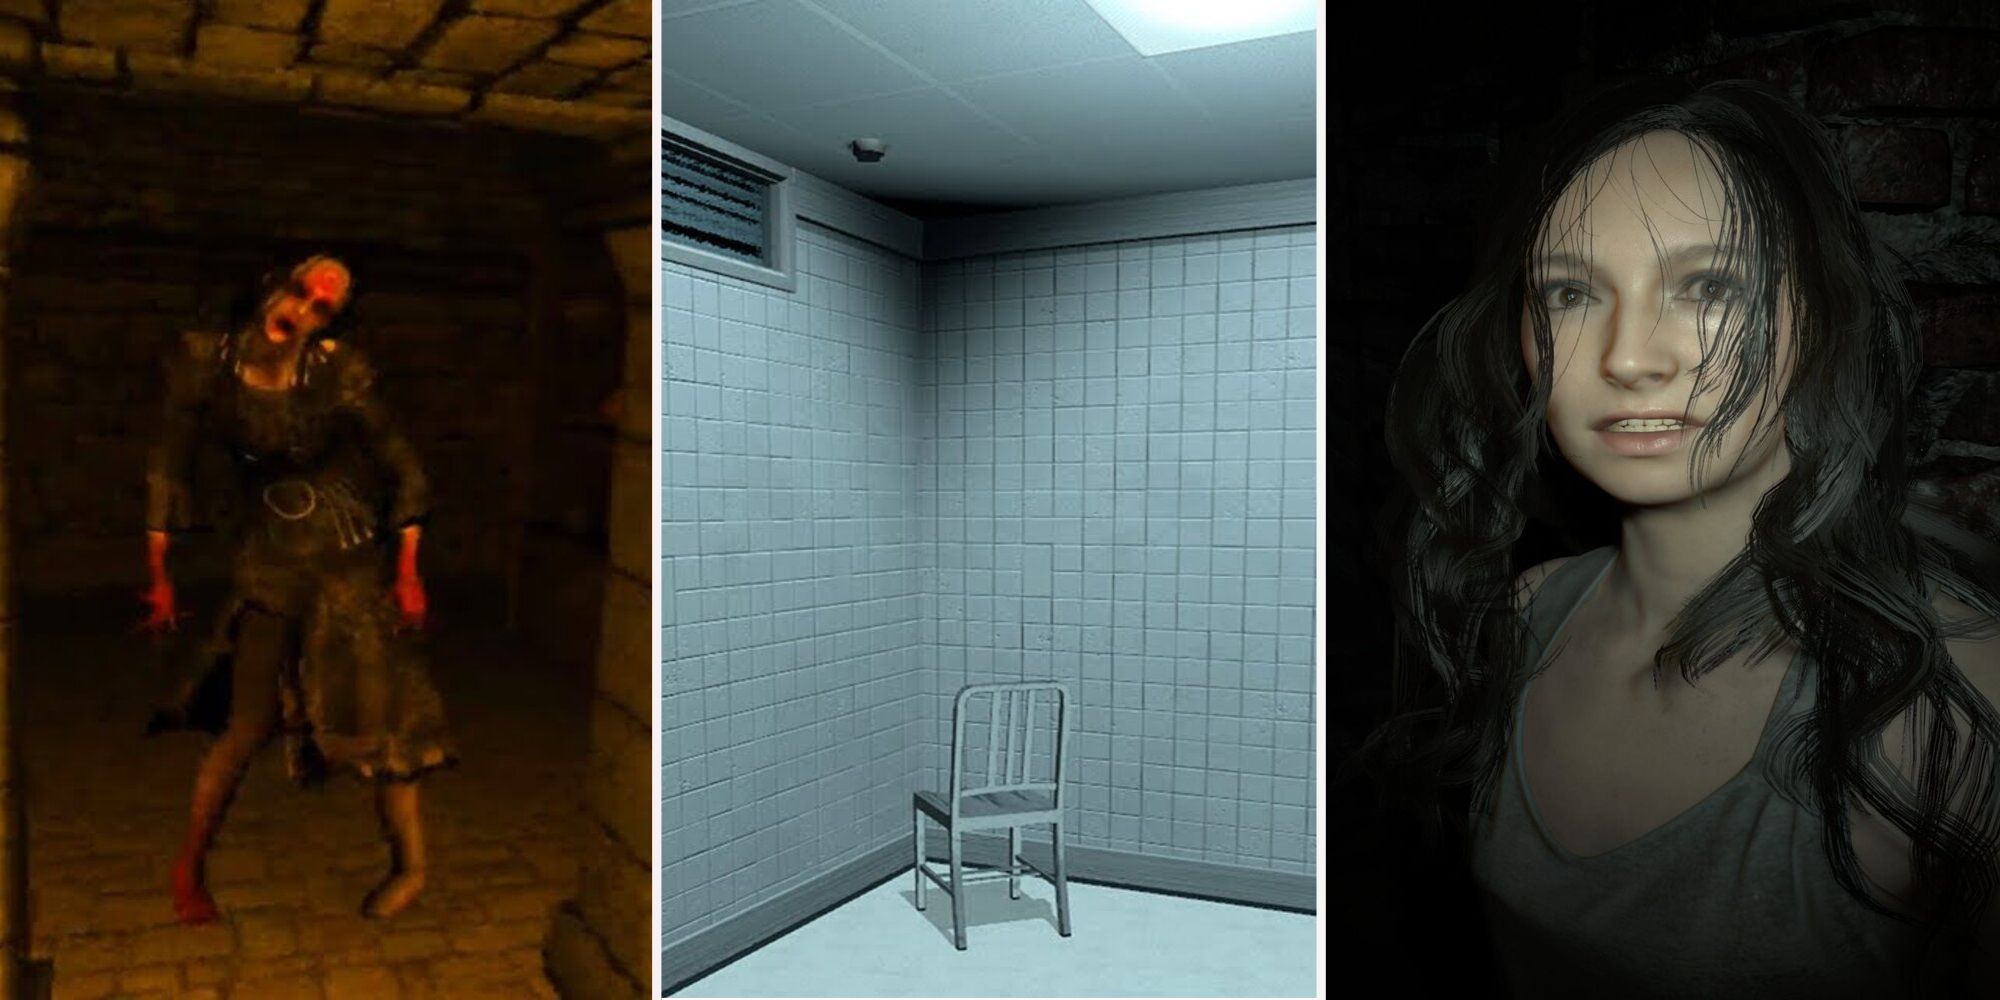 Split image of the ghost lady from Dreadhall A chair in a room and Mia from Resident Evil 7